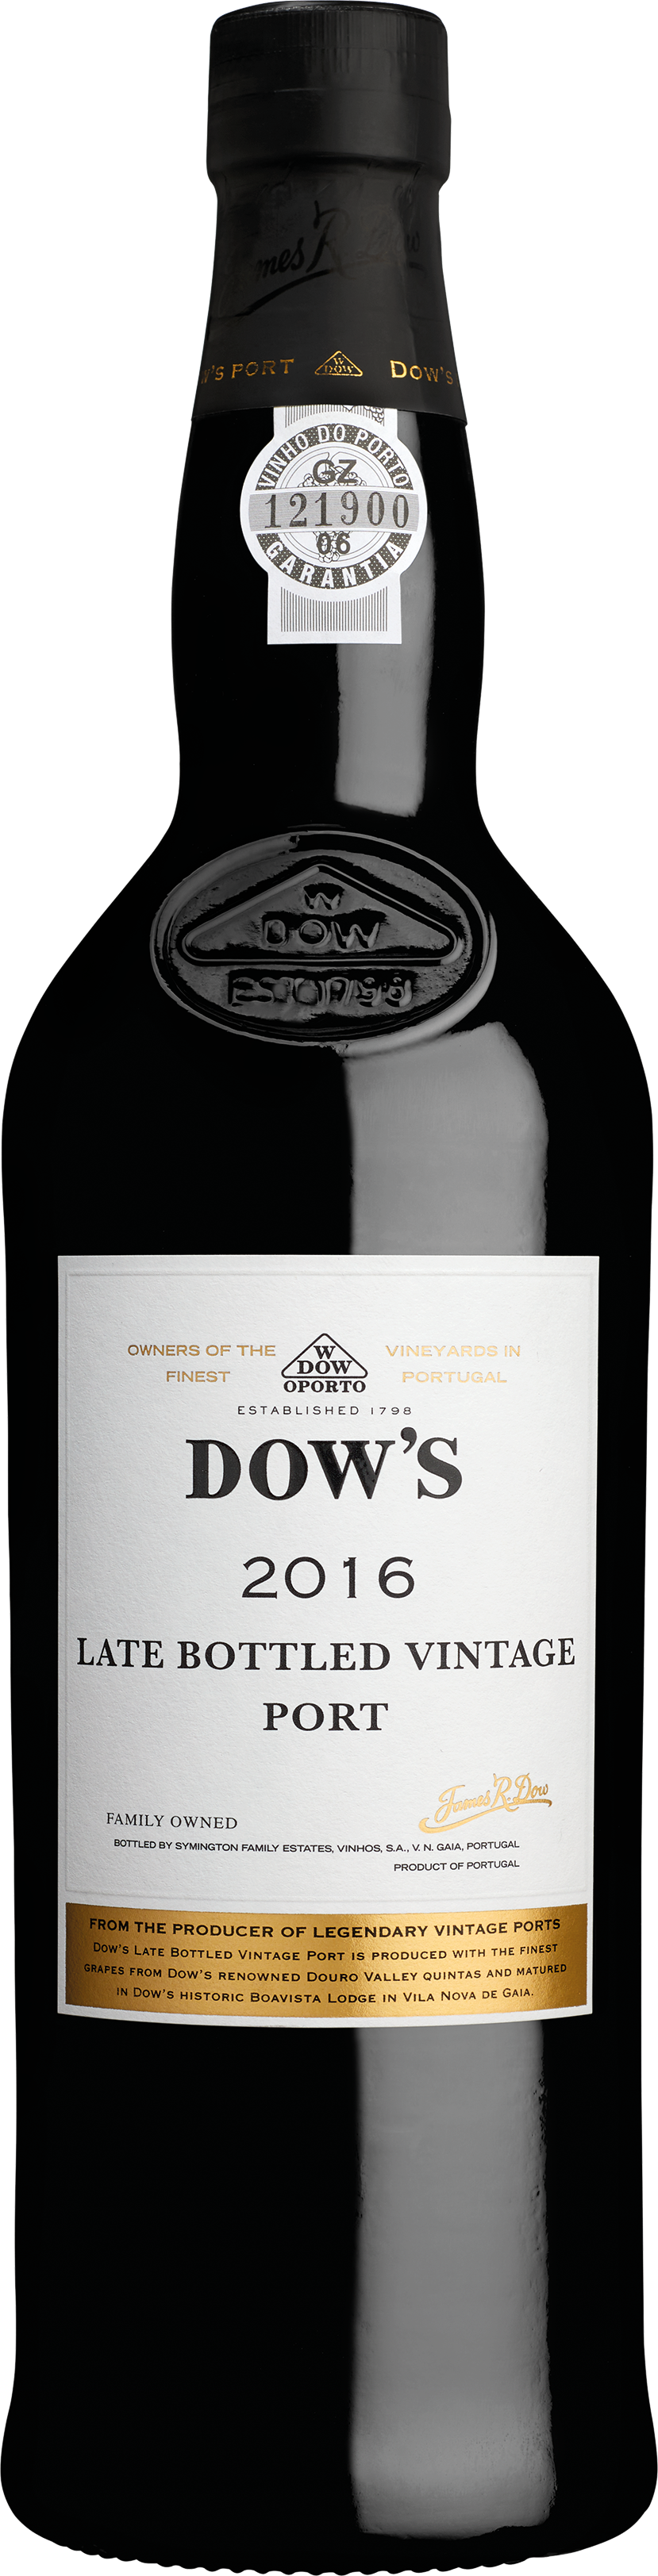 Product Image for DOW'S LATE BOTTLED VINTAGE PORT 2016